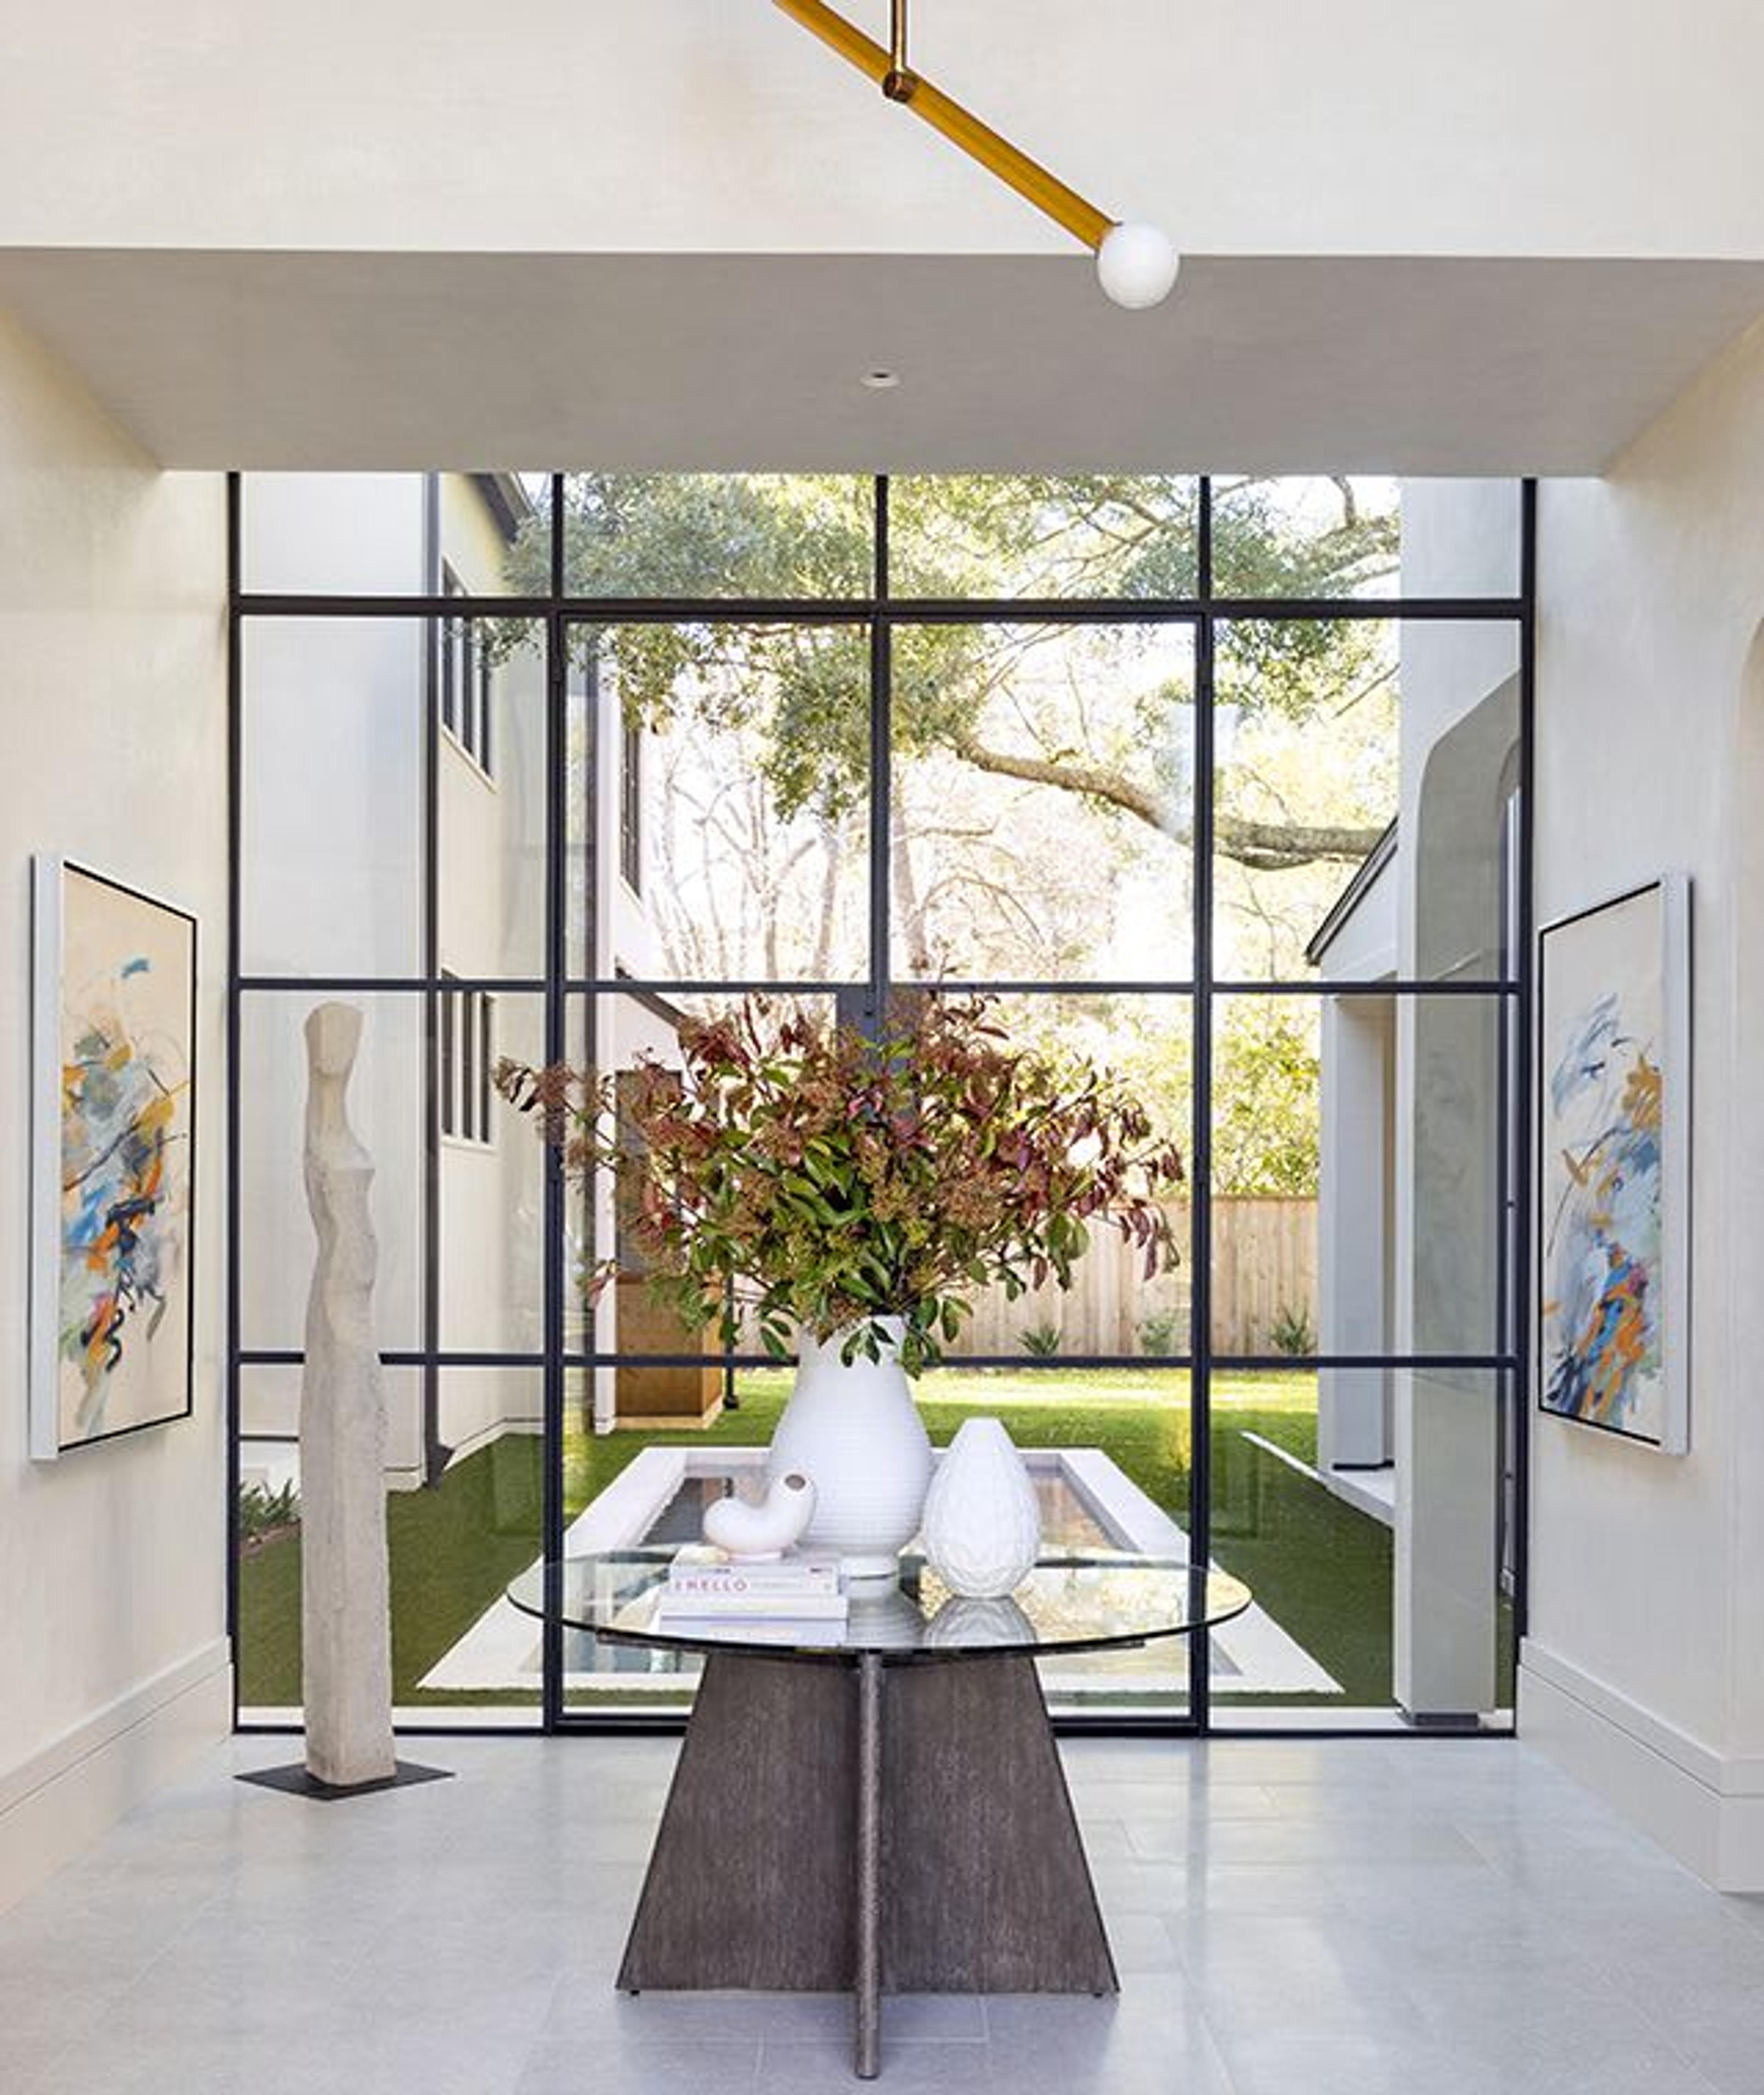 With diamond plaster walls, porcelain flooring, and steel doors that frame the pool and surrounding grounds, this dynamic foyer invites natural light to flood into this Piney Point Village home.